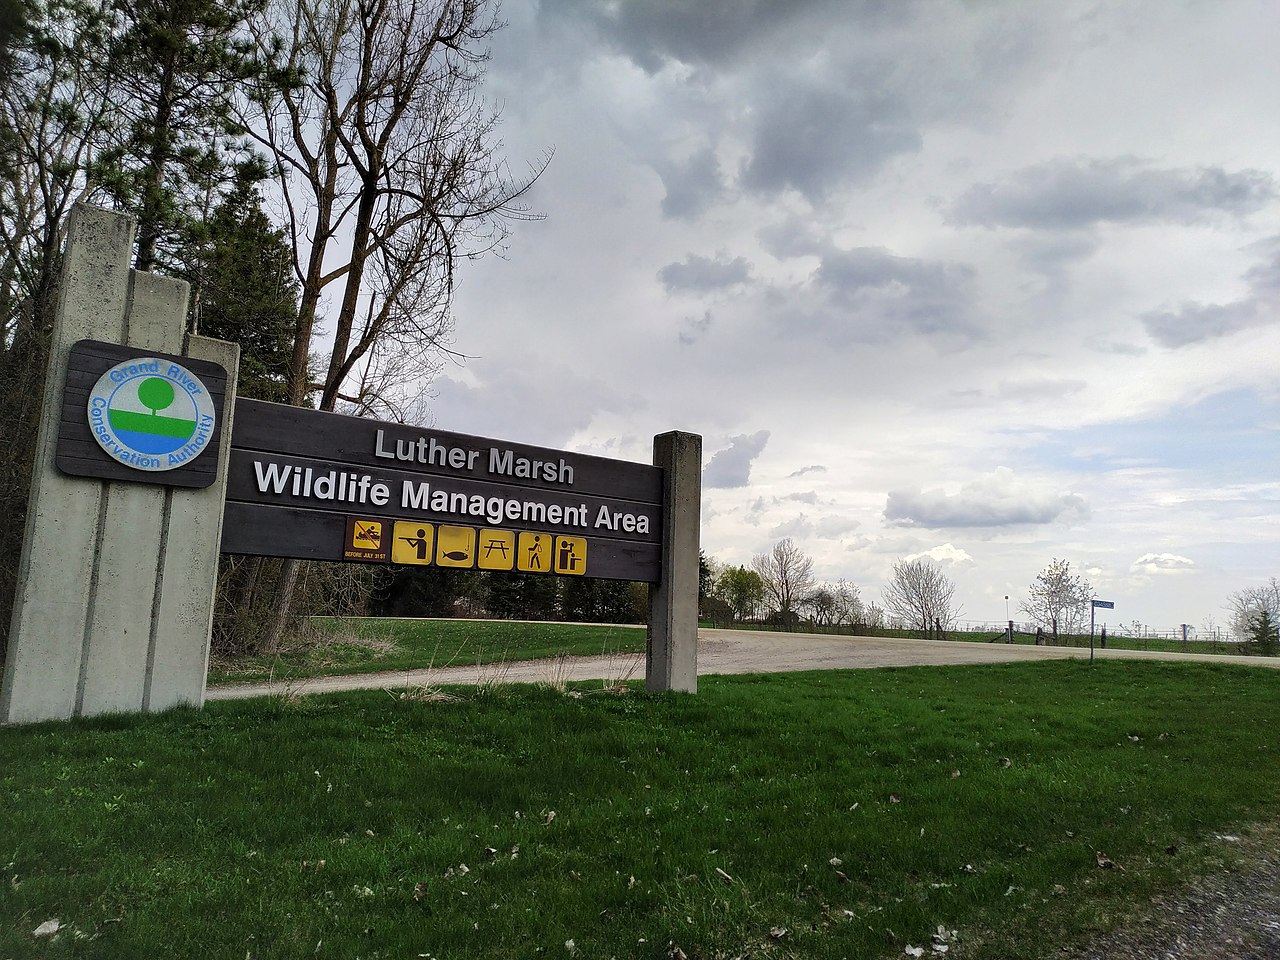 Luther Marsh wildlife conservation area sign, showing off recreational amenities near Orangeville